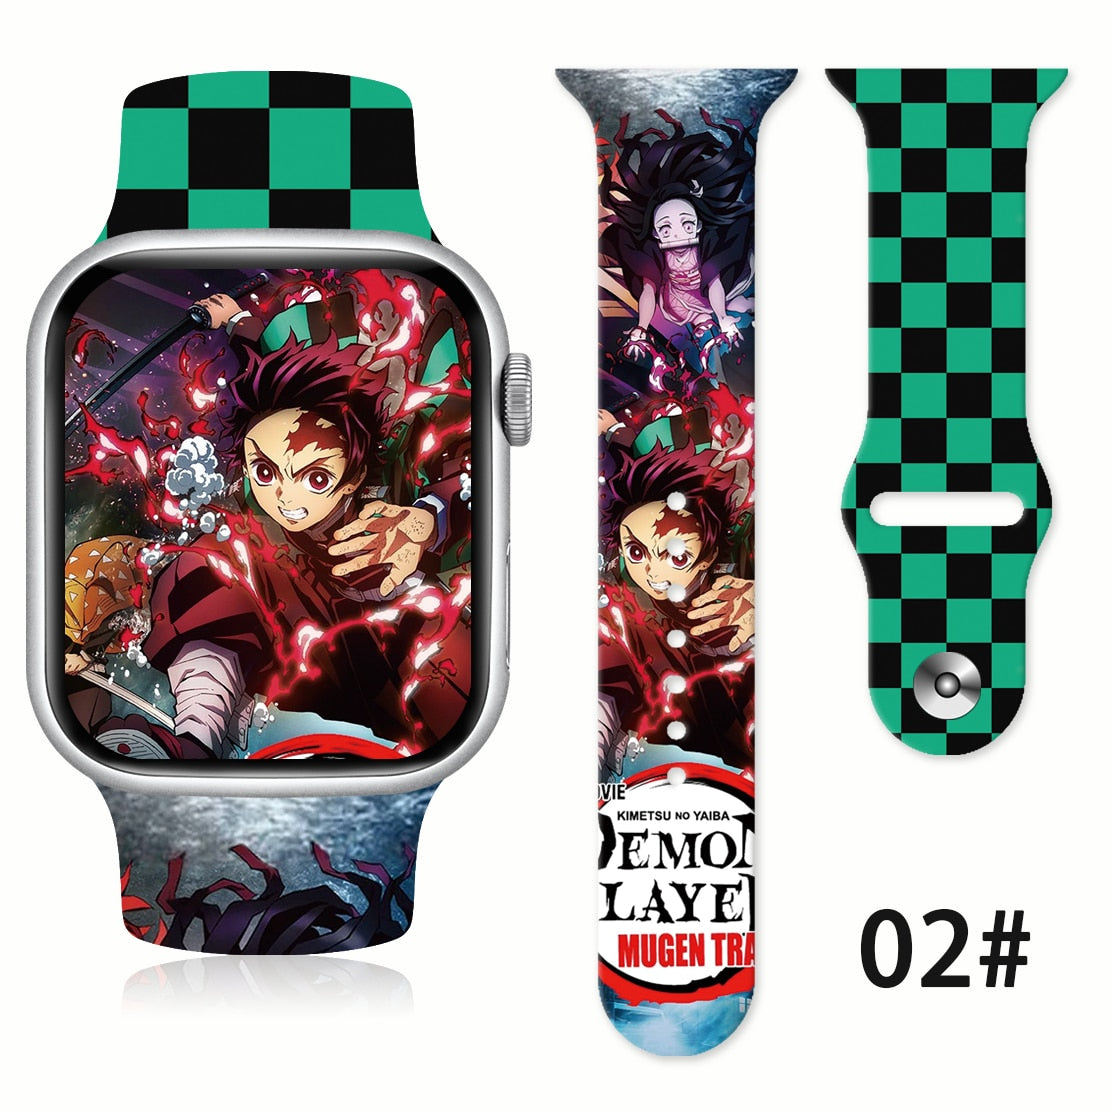 Demon Slayer Strap Band for Apple Watch 02